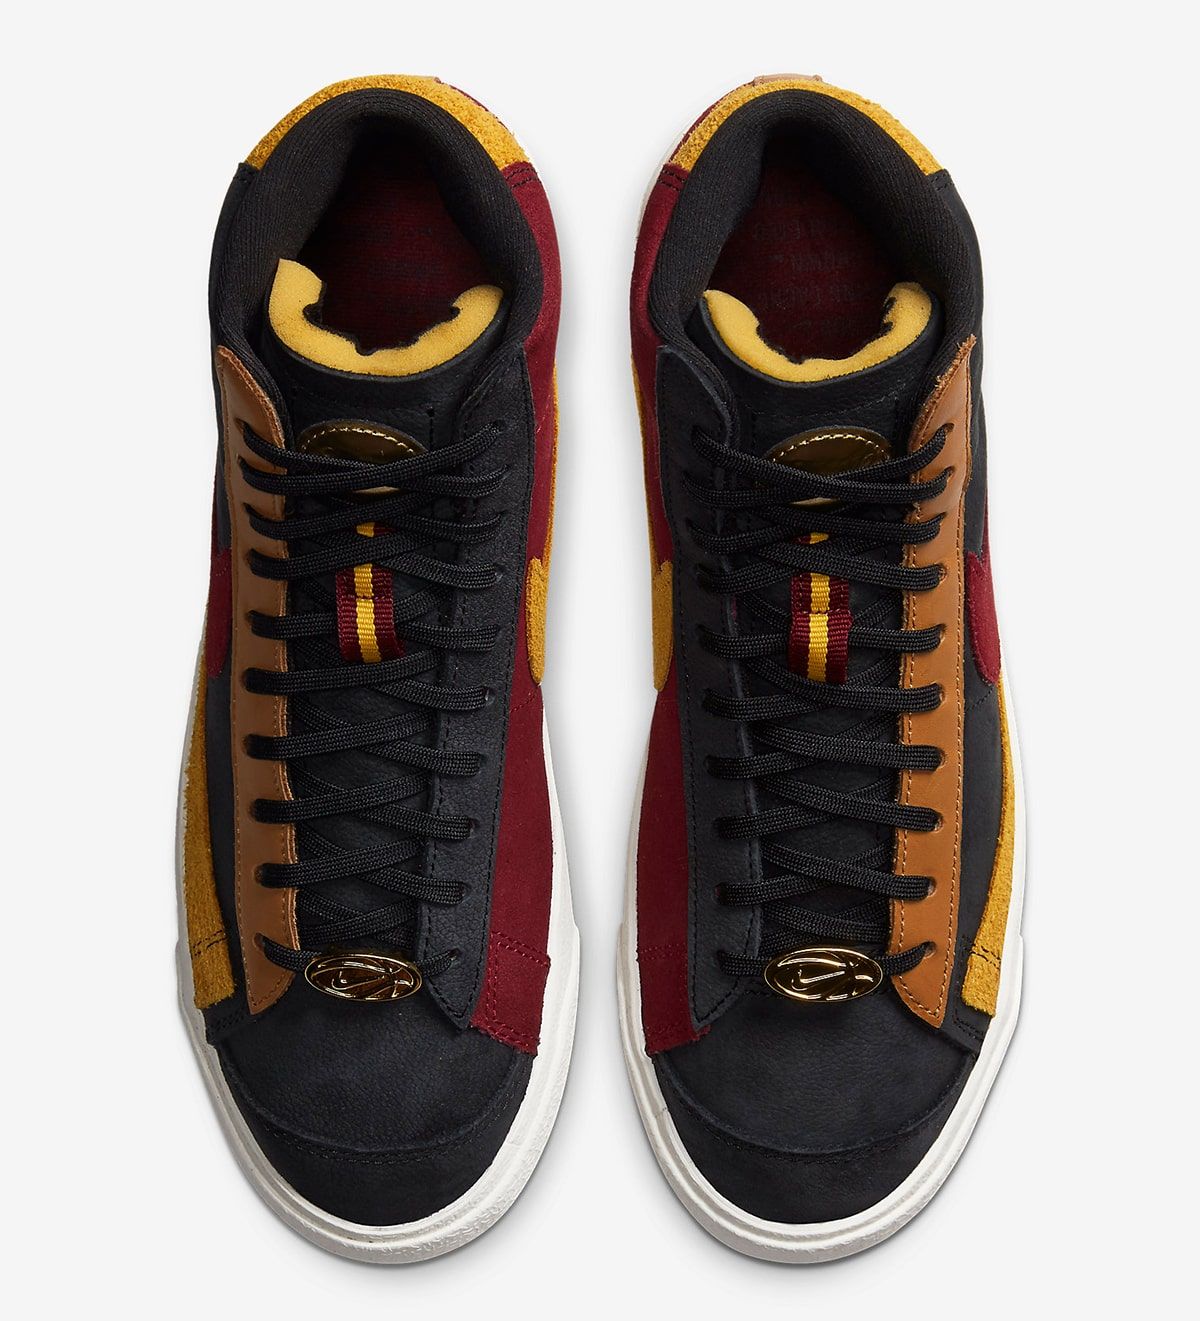 Nike's Blazer Mid Gets Geared-Up in Gryffindor Garb | House of Heat°